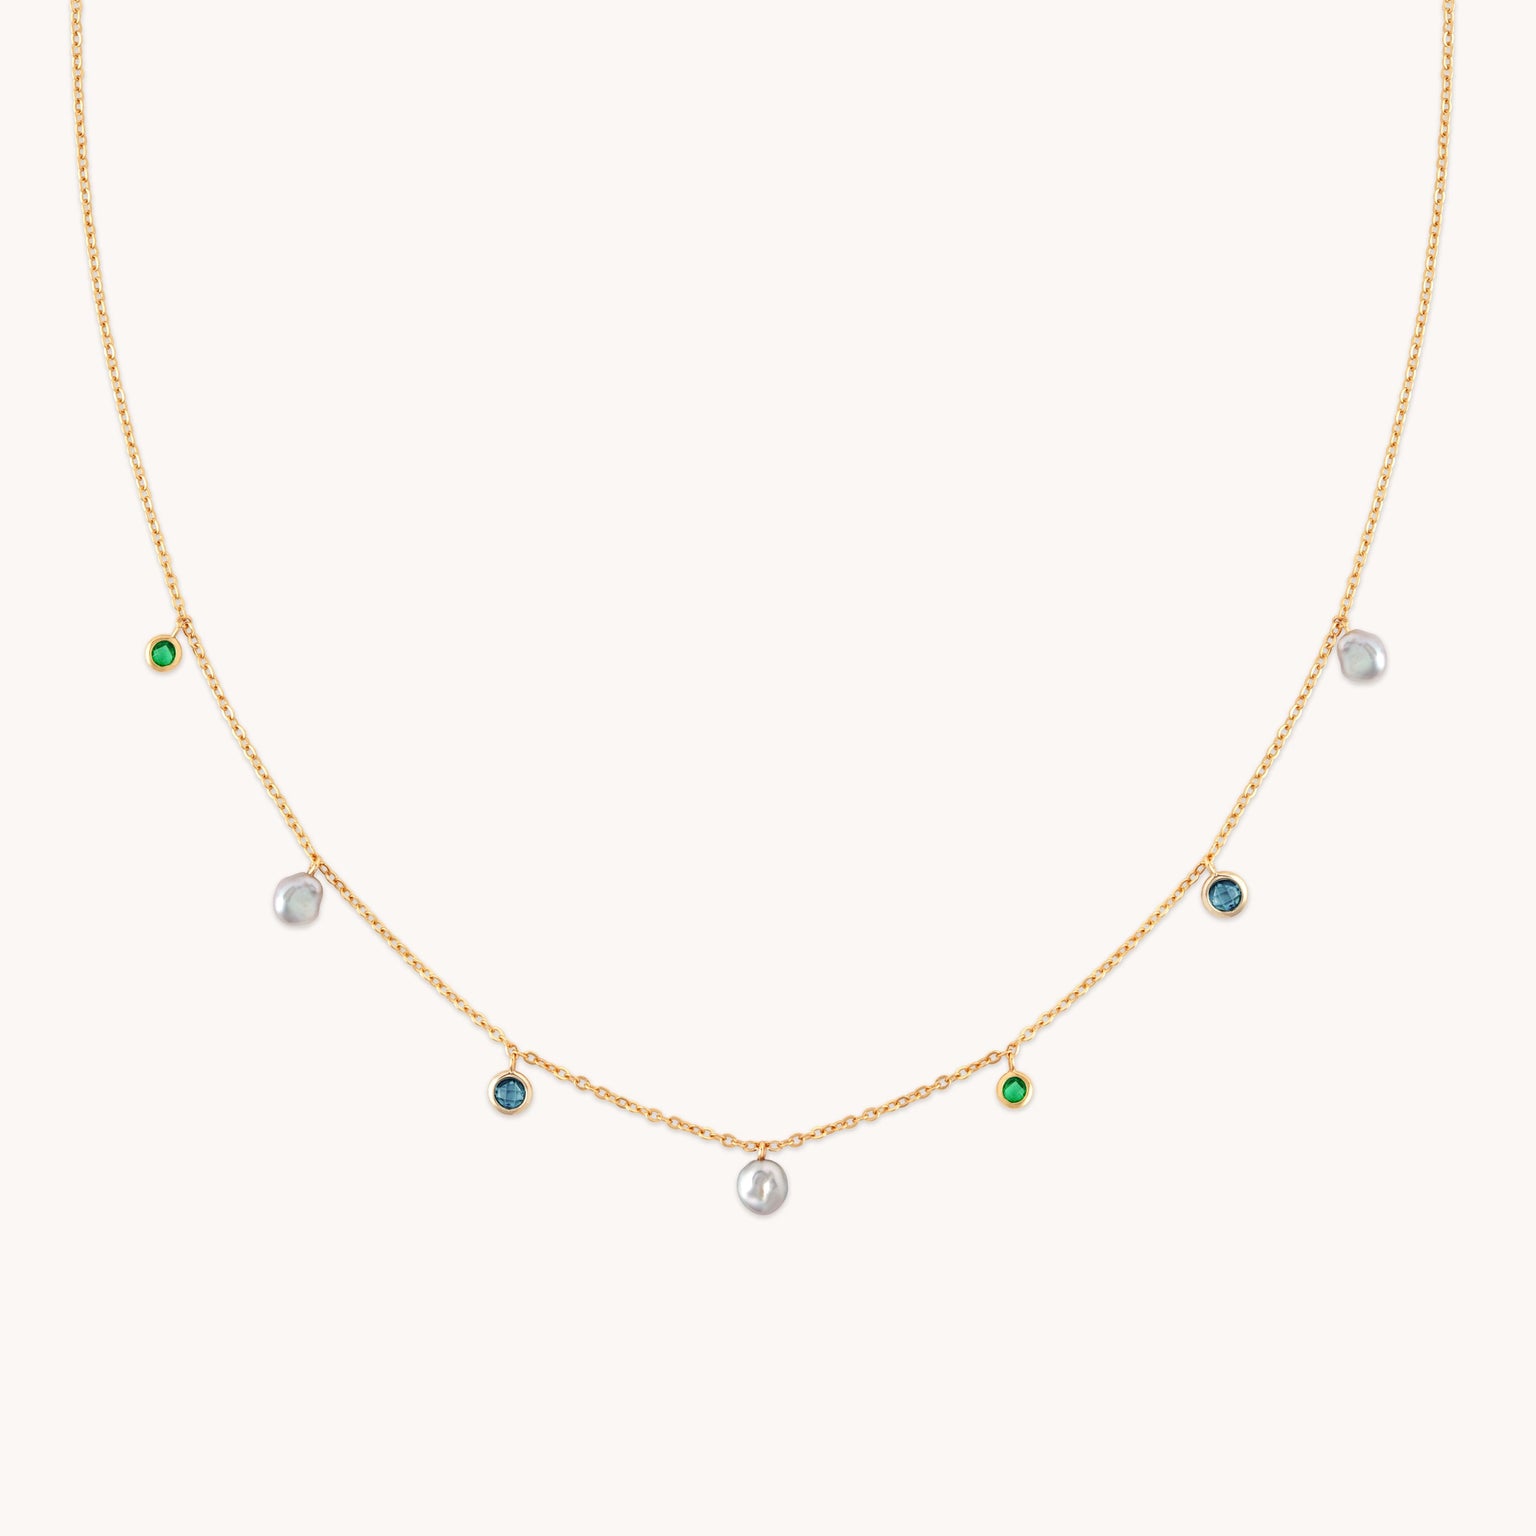 Tranquility Pearl Charm Necklace in Gold